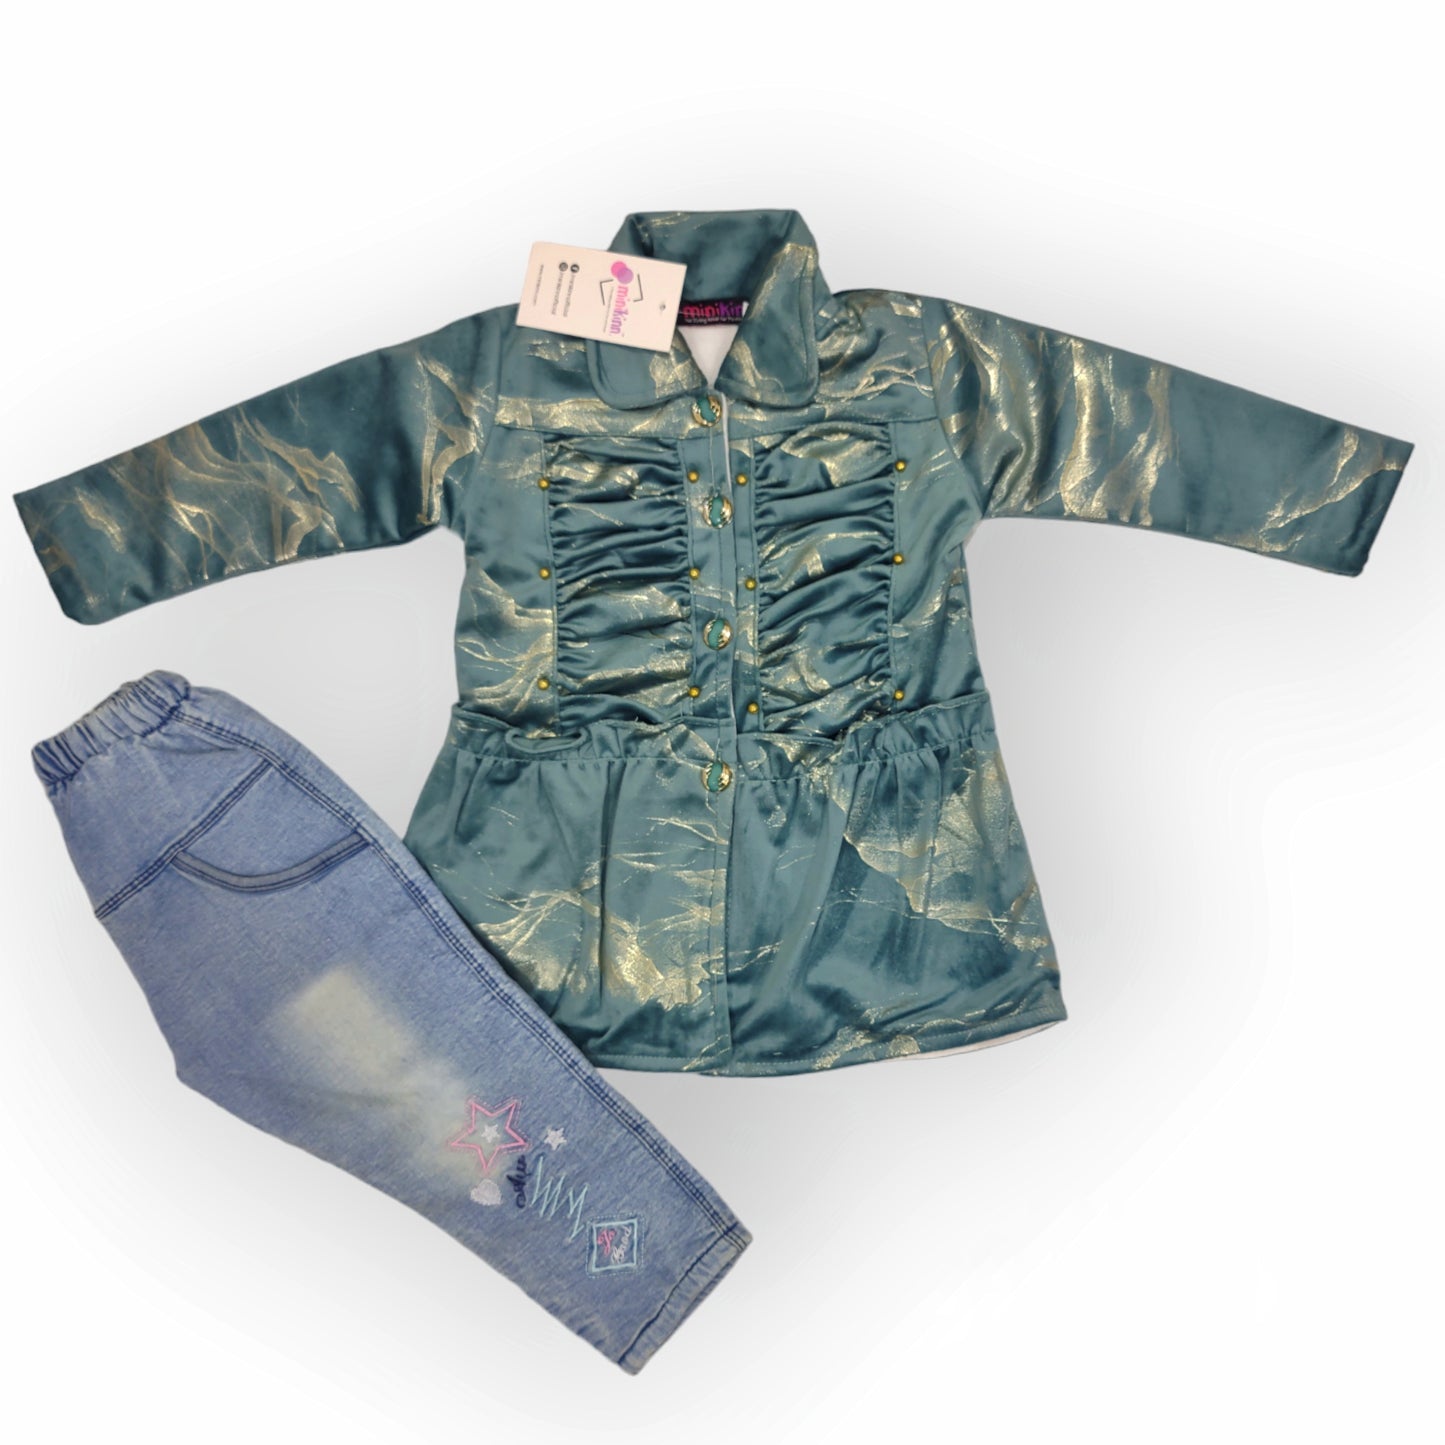 Girls Imported Laminated Marble Velour Fleece Jacket with Embroidered Denim Fleece Pants Complete Suit - 2 Piece Set (Gvl-V5-2041)